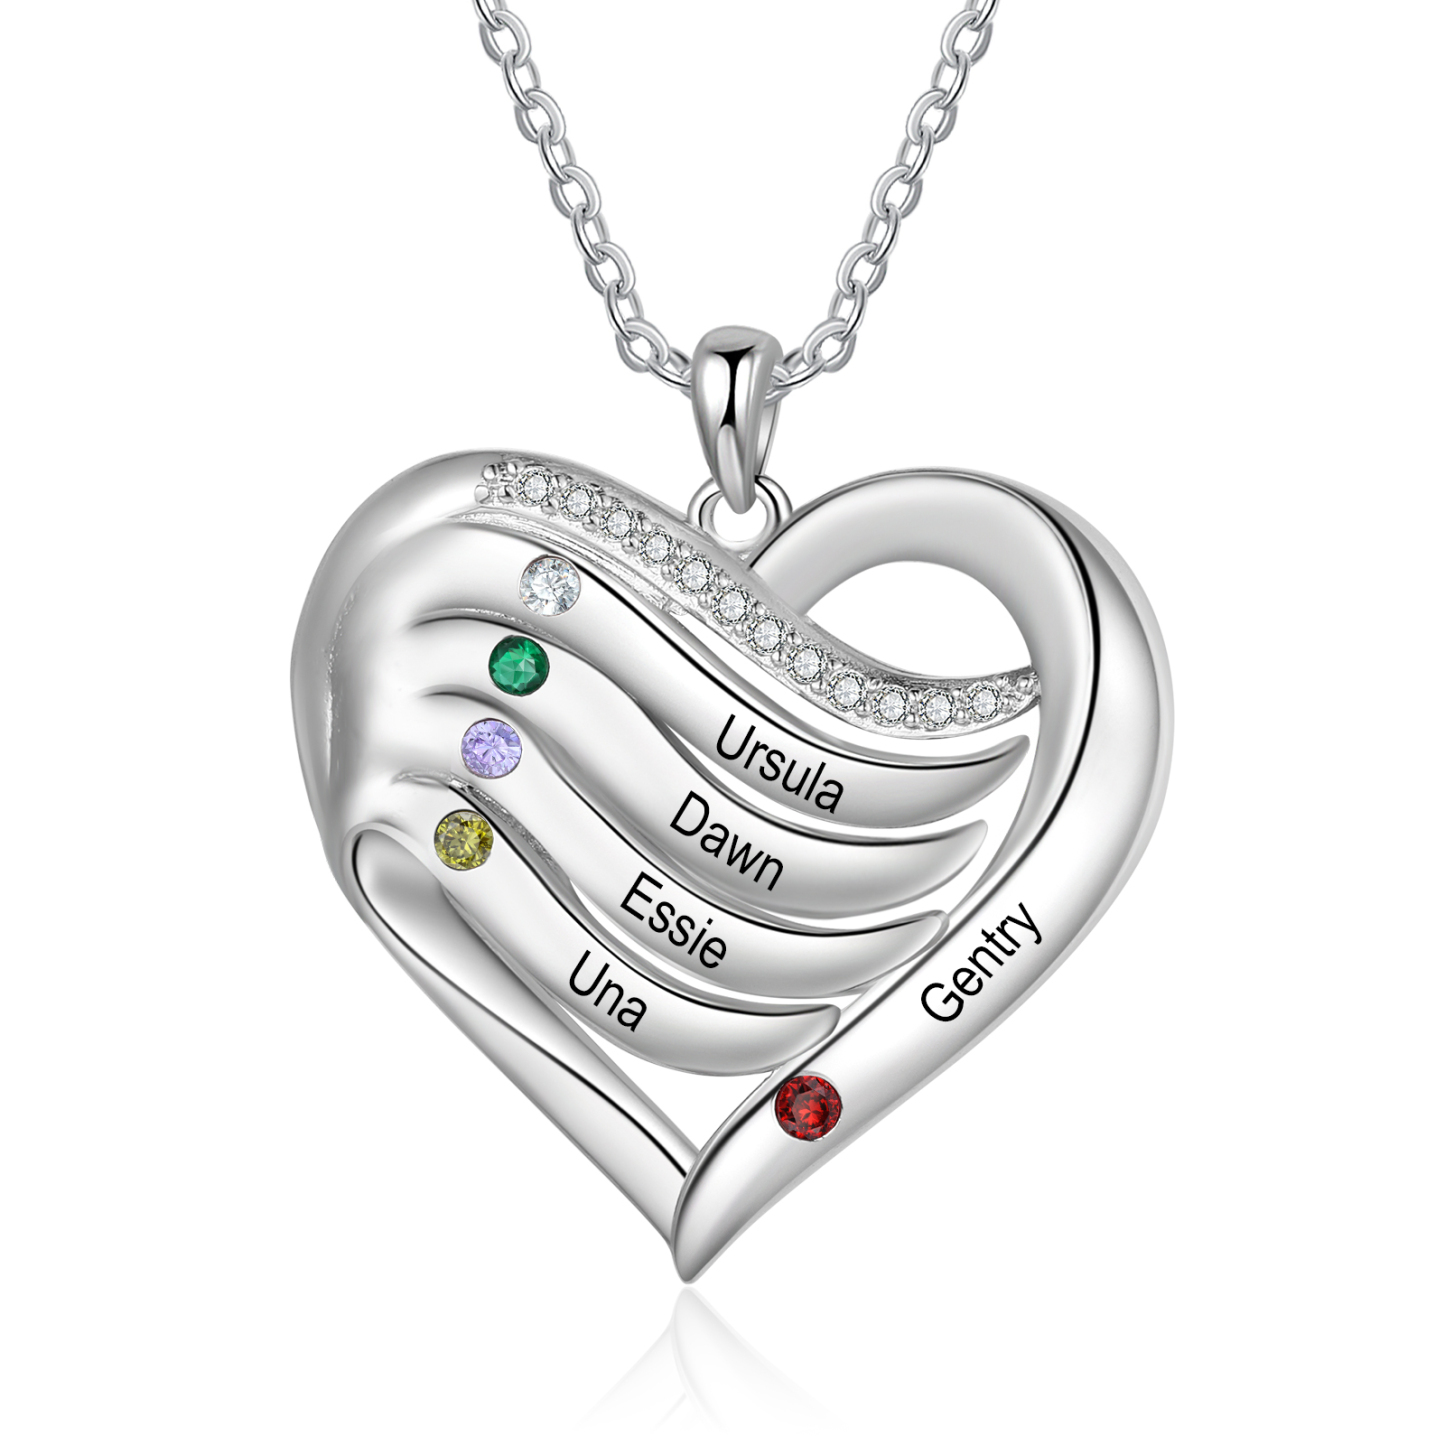 5 Names - Personalized S925 Silver Heart Necklace with Birthstone and Name, Beautiful Gift for Her